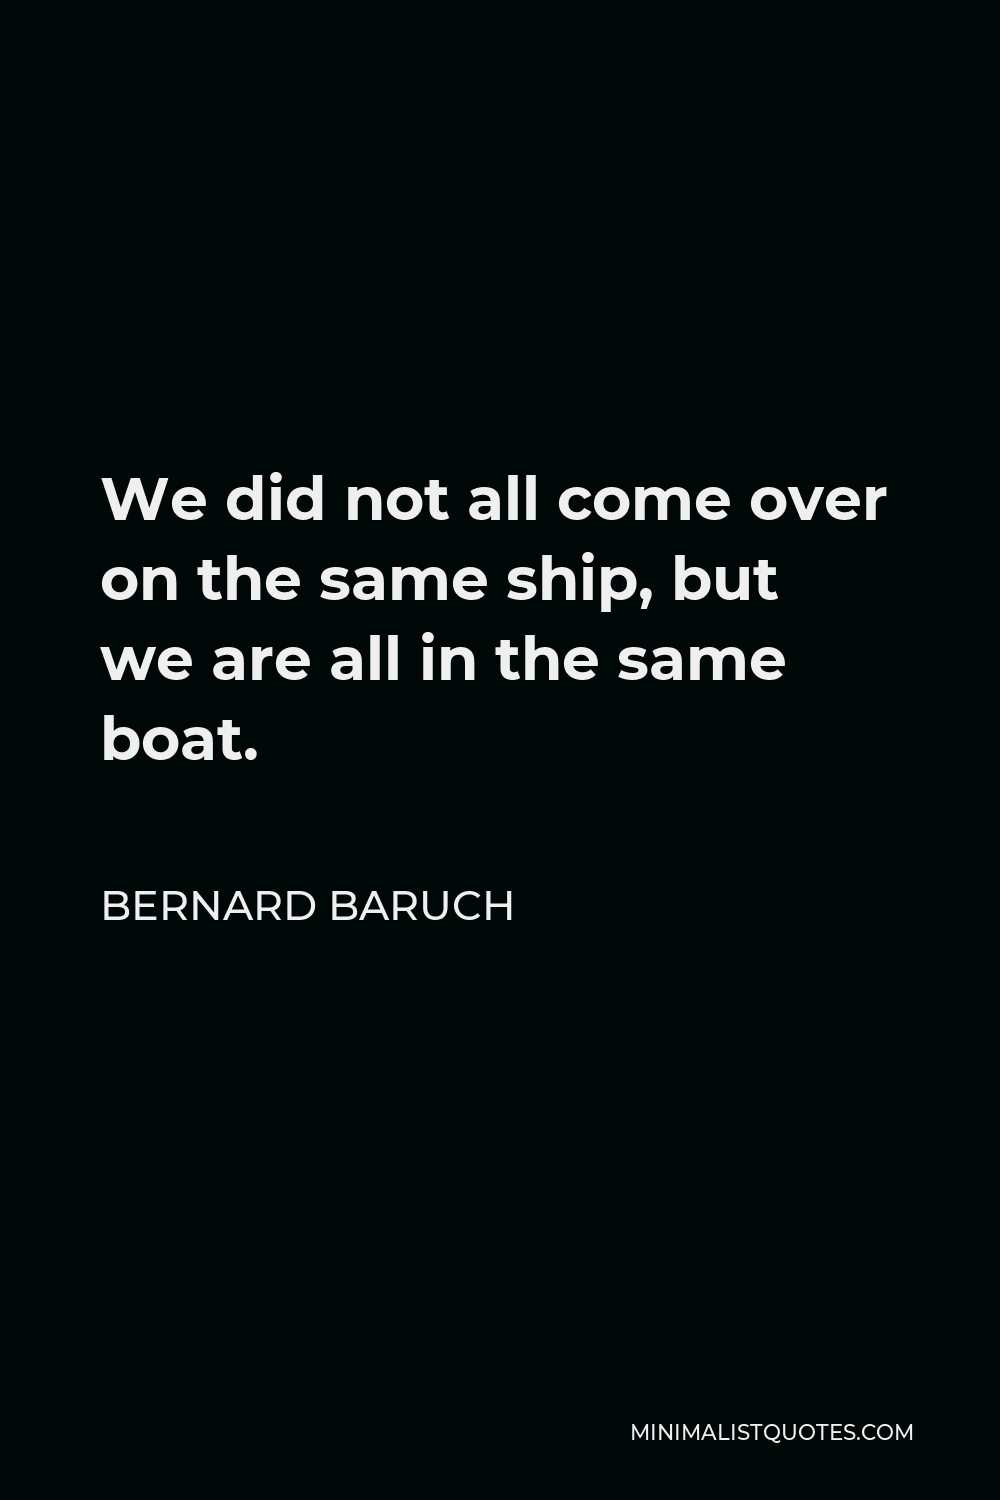 Bernard Baruch Quote - We did not all come over on the same ship, but we are all in the same boat.